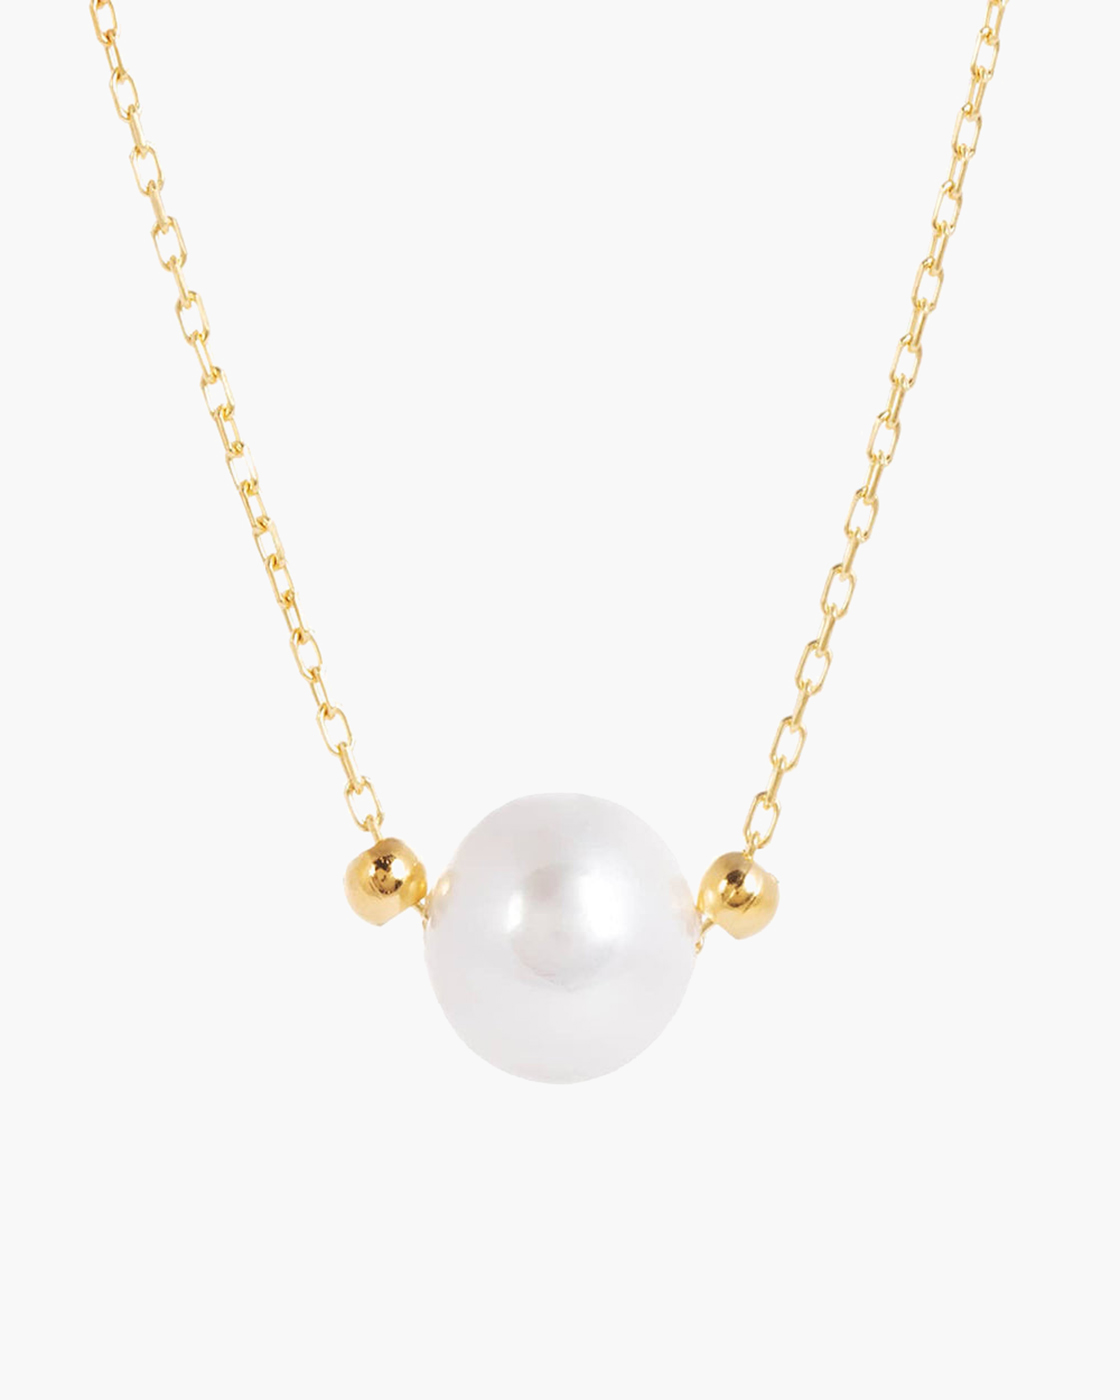 Laura Gold Chain Necklace with single pearl